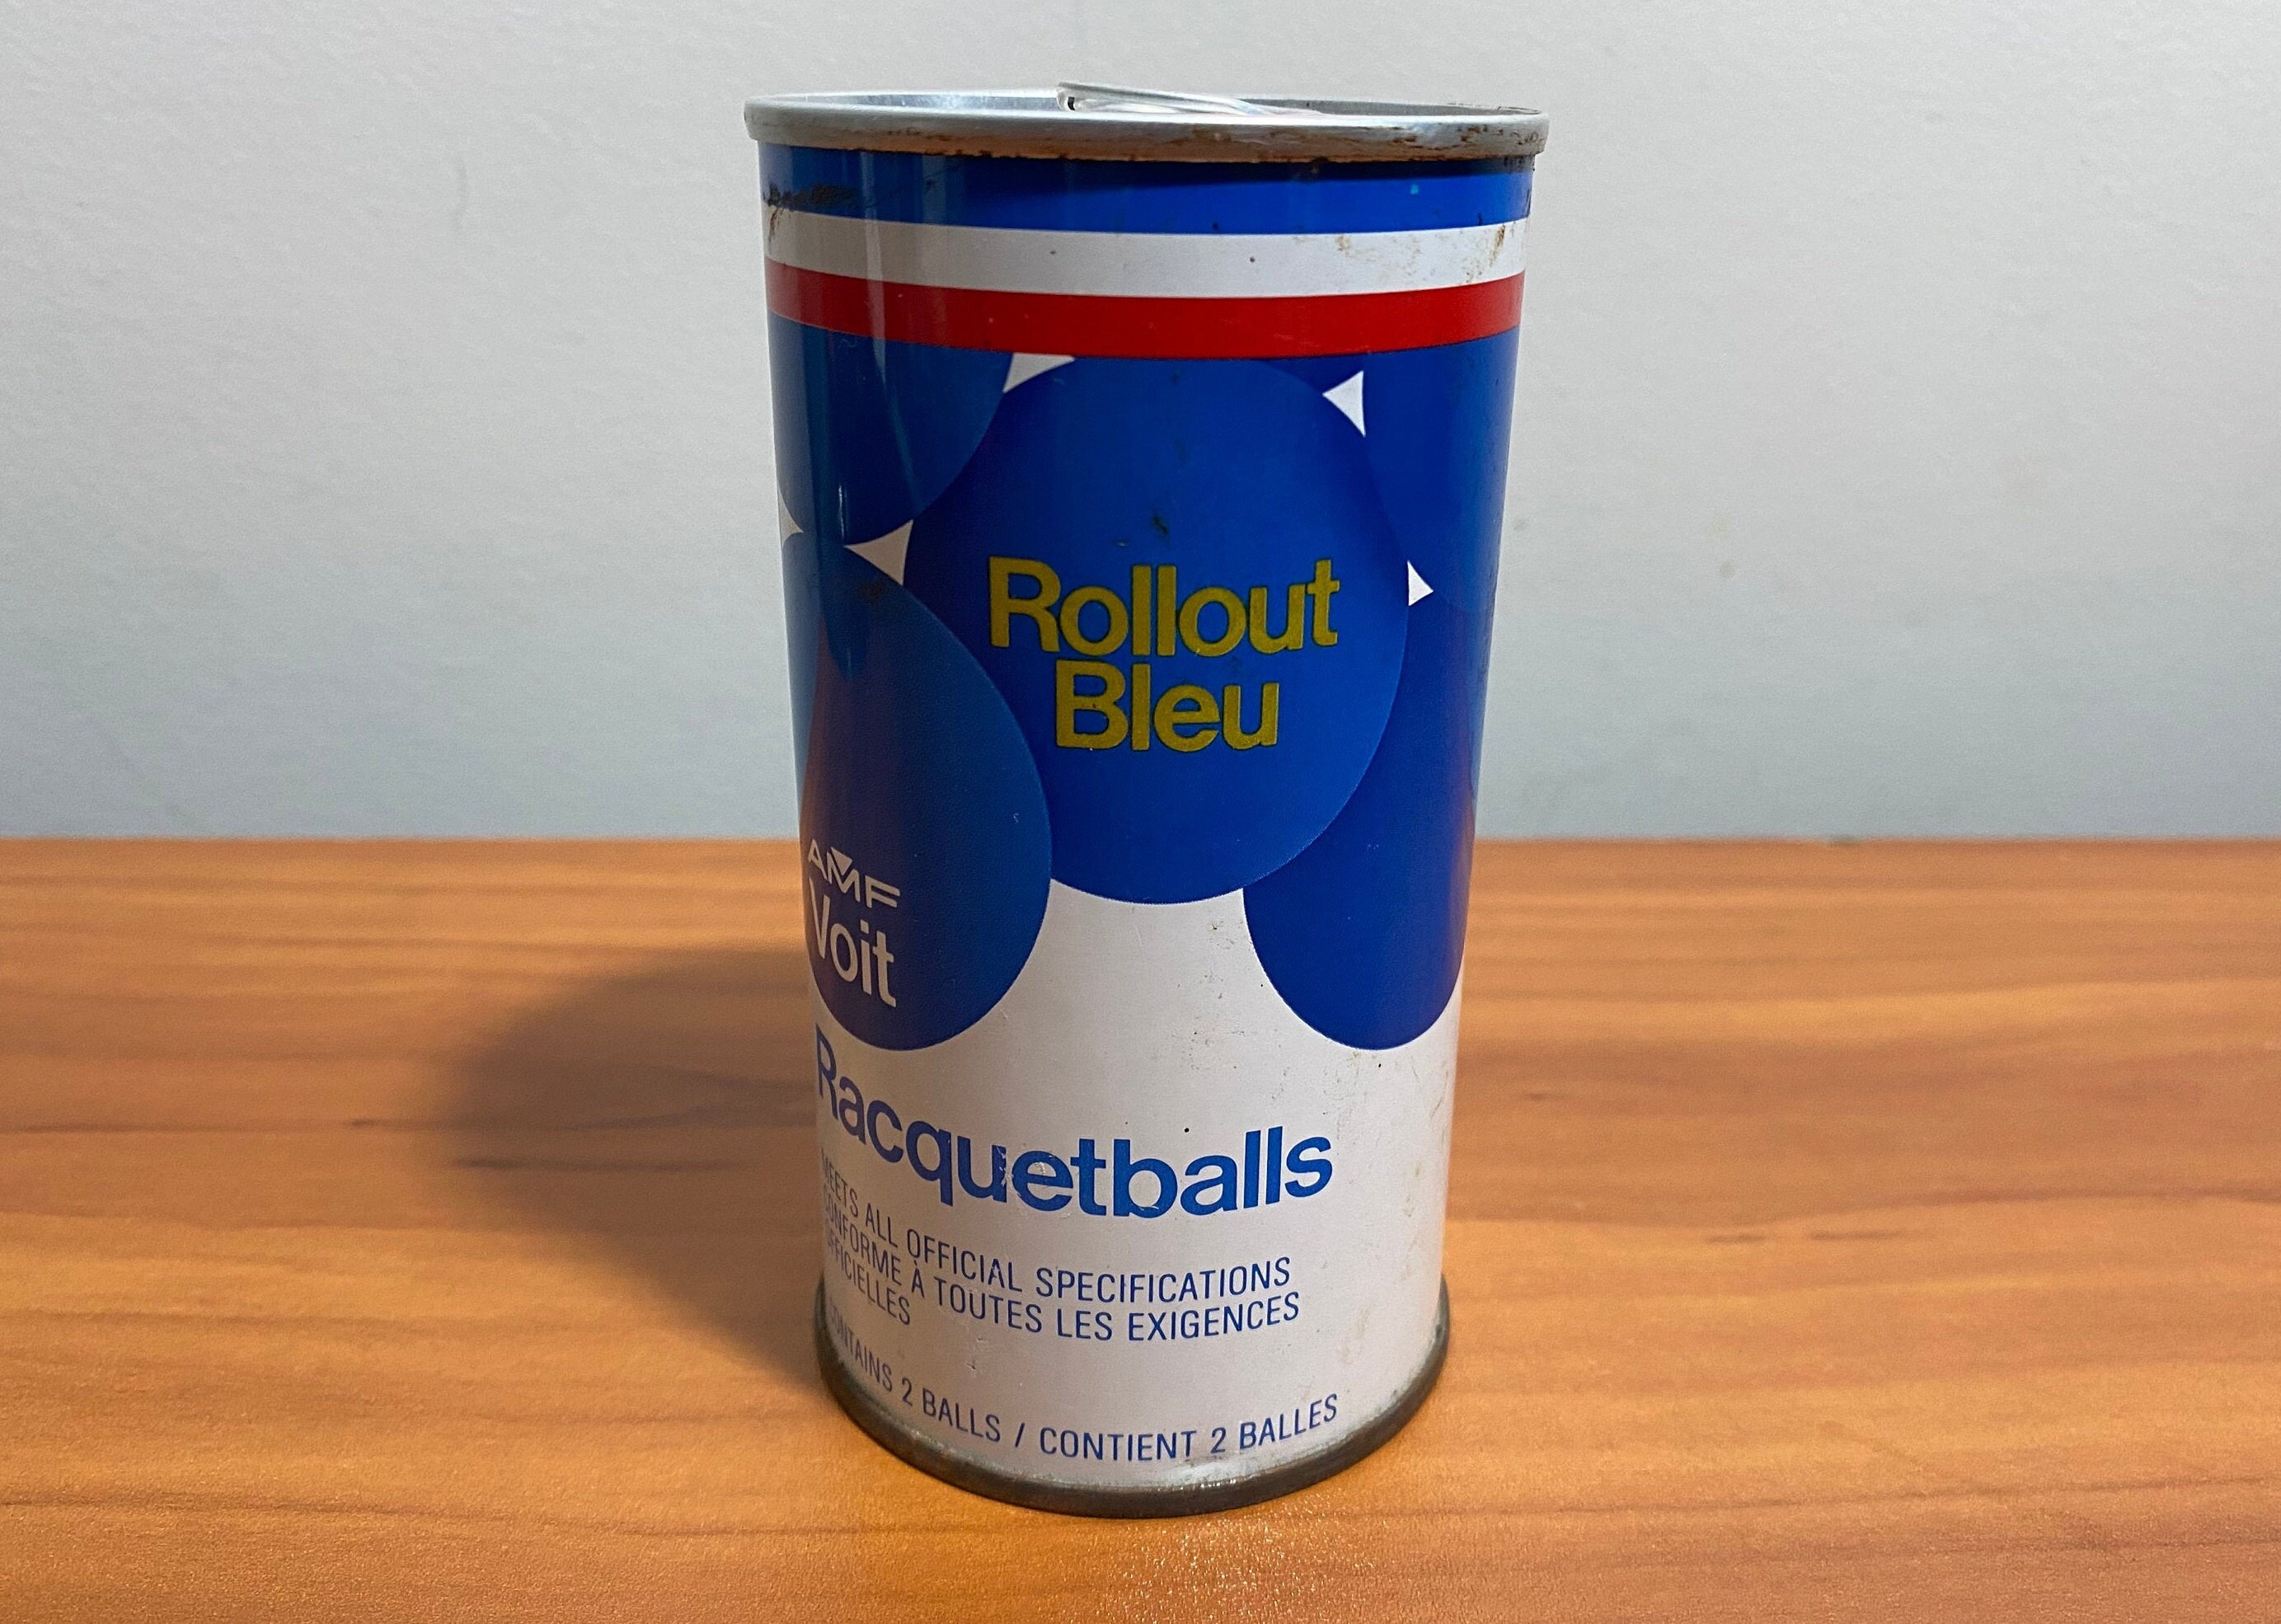 AMF Voit Rollout Raquetballs BLACK BALLS Red Cans Rare 